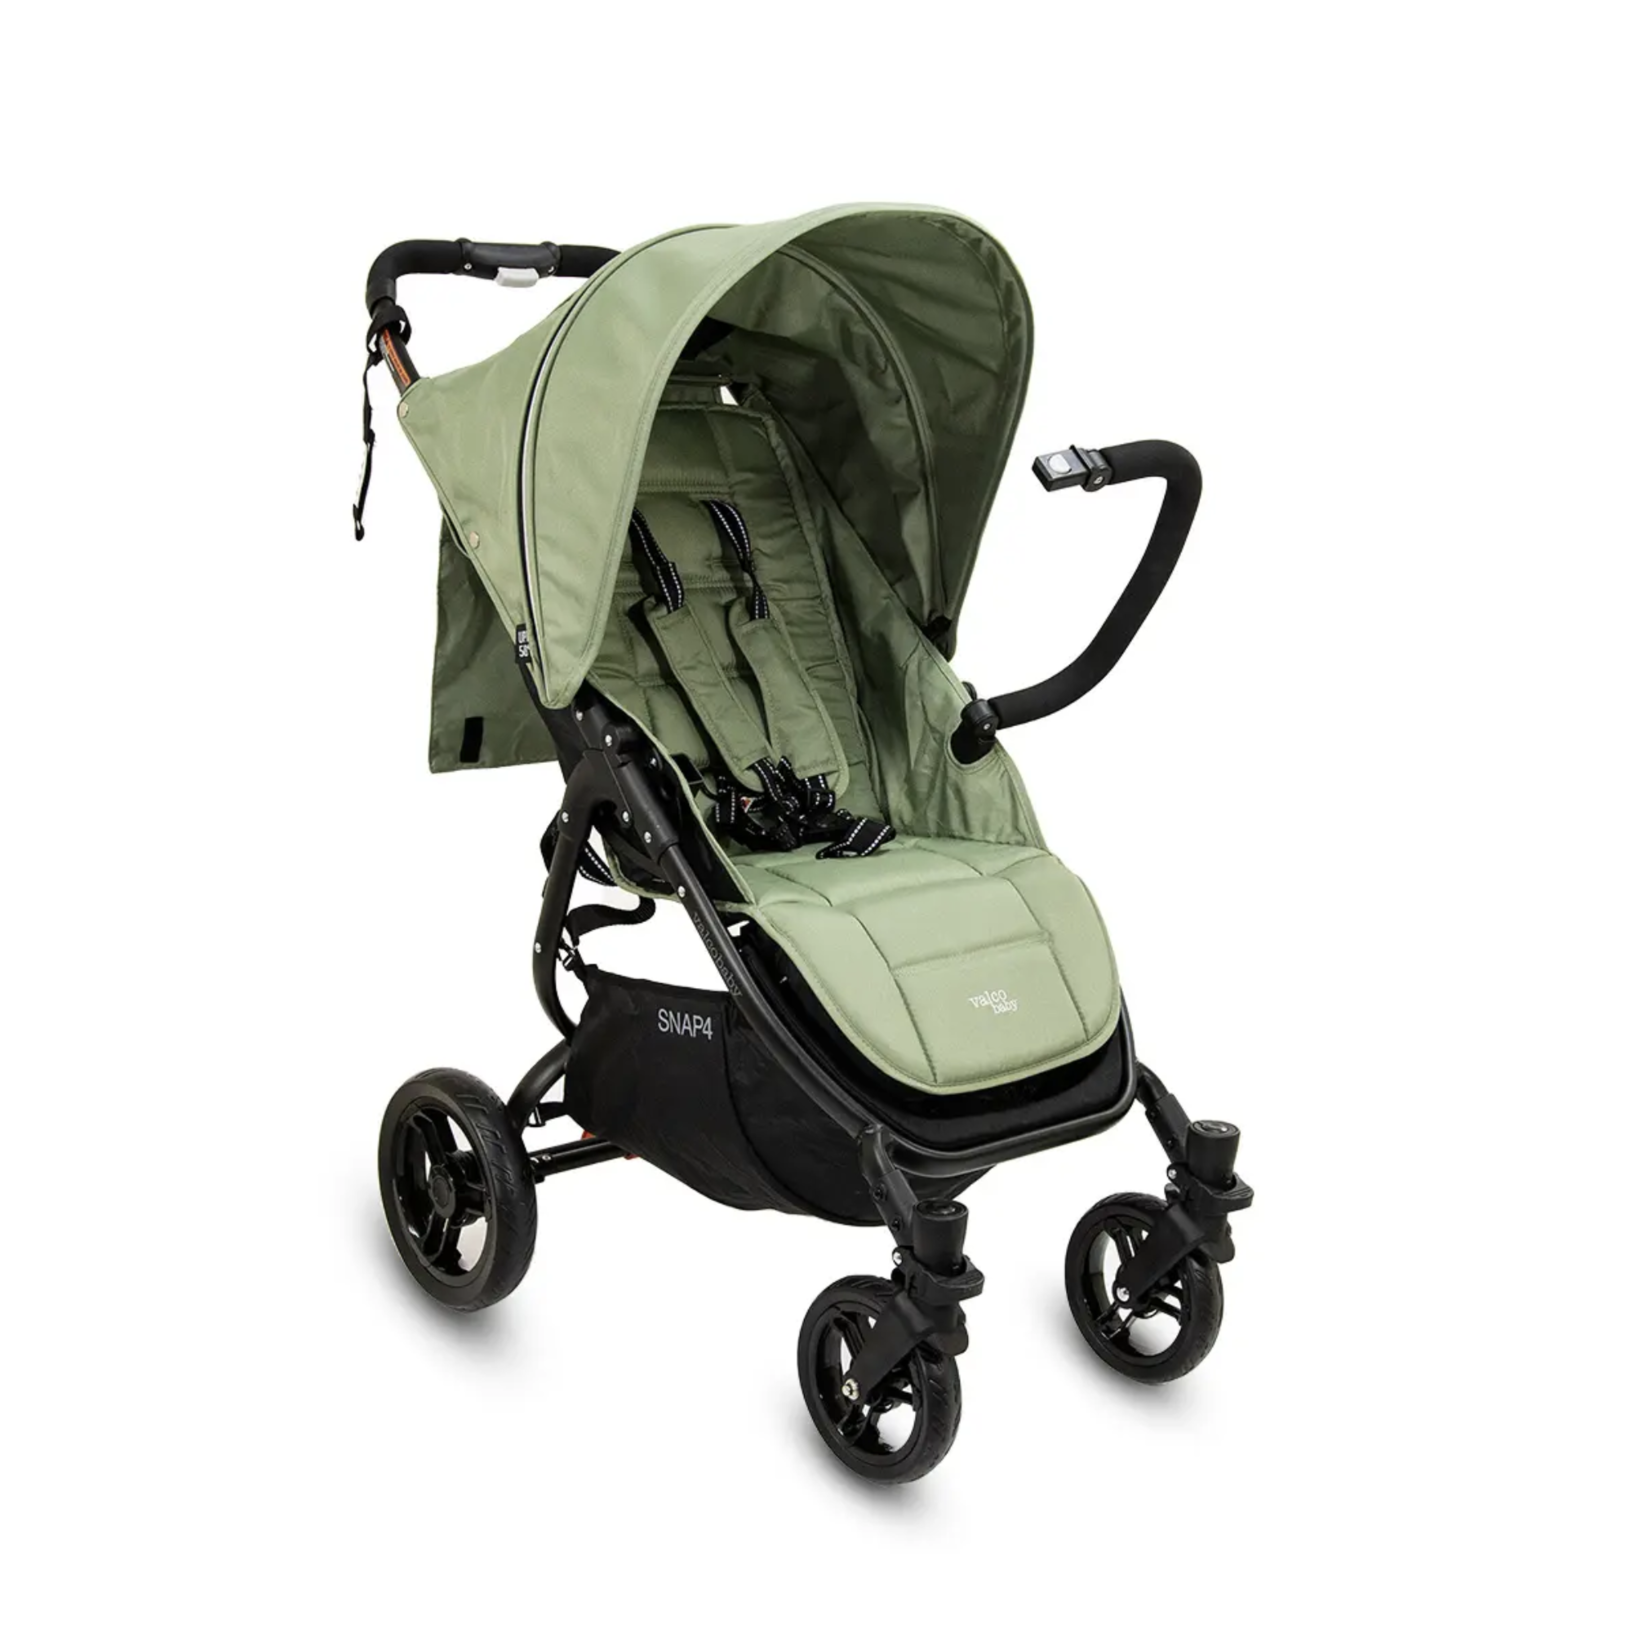 Valco Baby Snap 4 - Forest (N0169) Limited edition